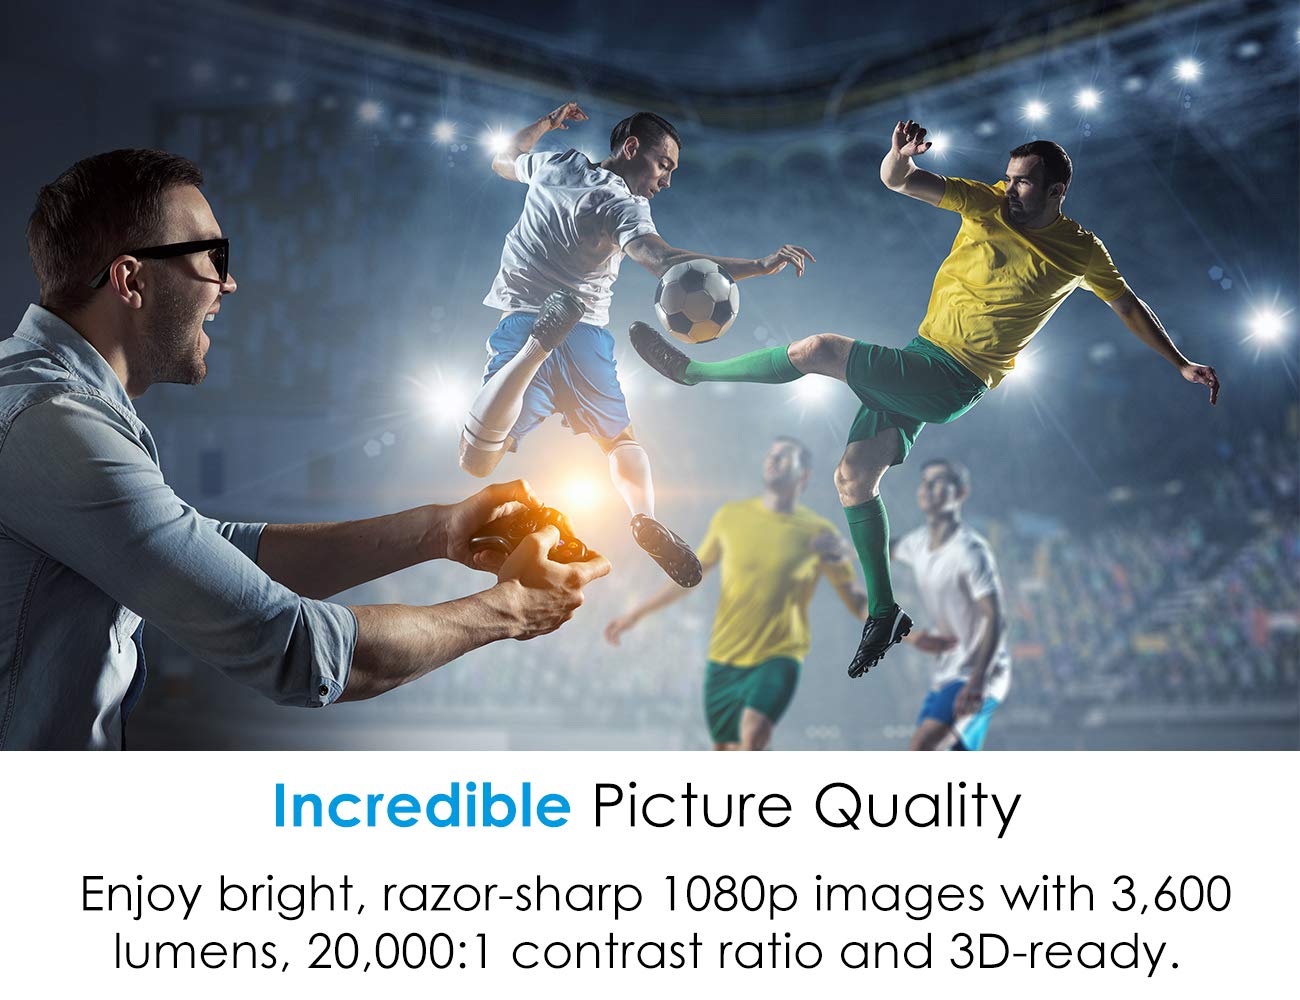 Optoma GT5600 Ultra Short Throw Gaming and Movie Projector